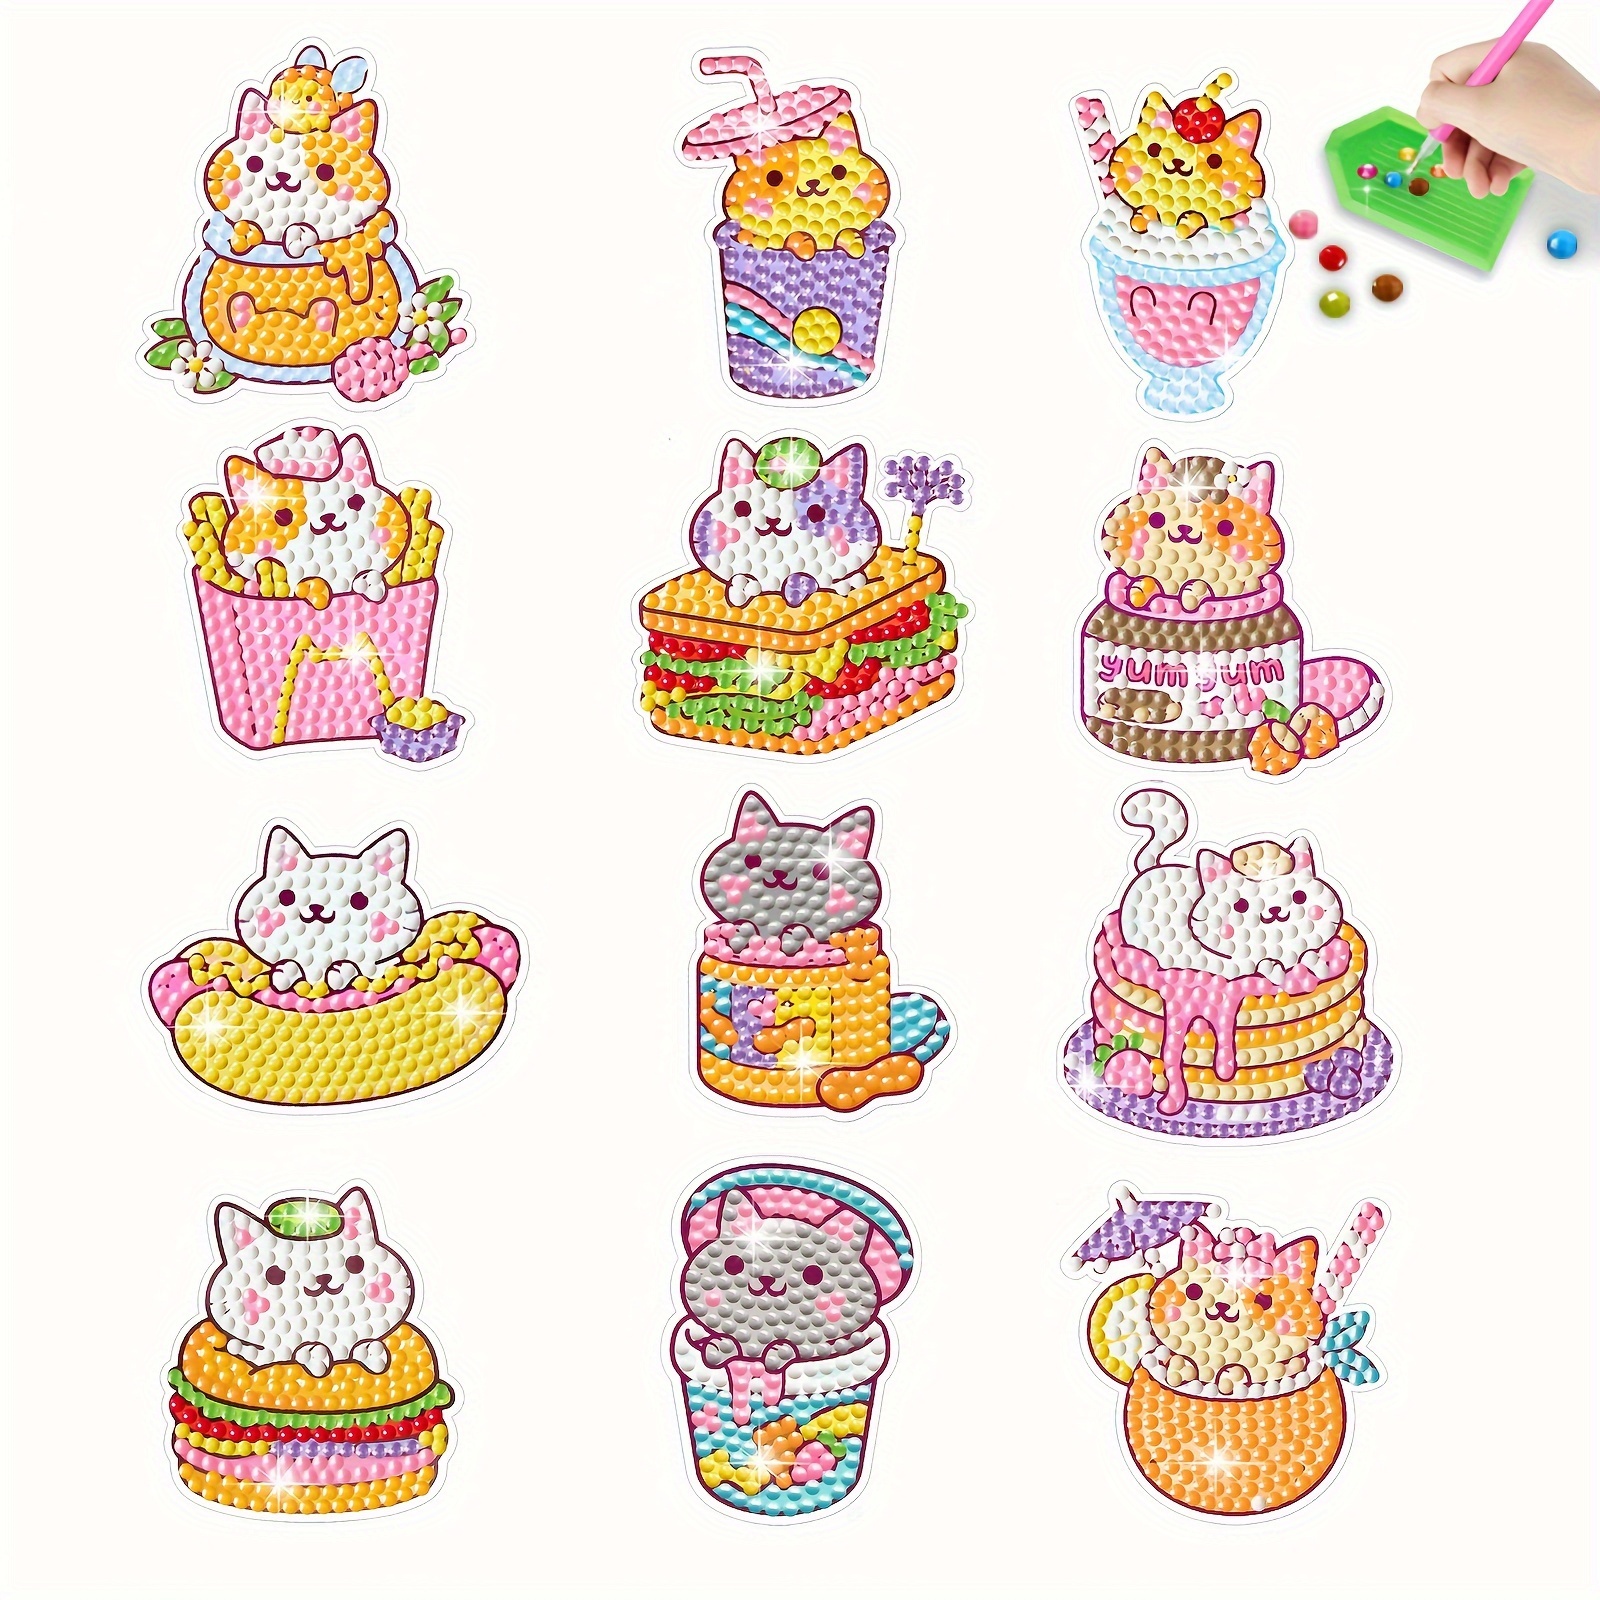 

12pcs Diamond Painting Kits For Handwork Diy Cute Cat Diamond Art Sticker Craft With Gem Tool, Arts And Crafts, Best Mosaic Stickers Gift